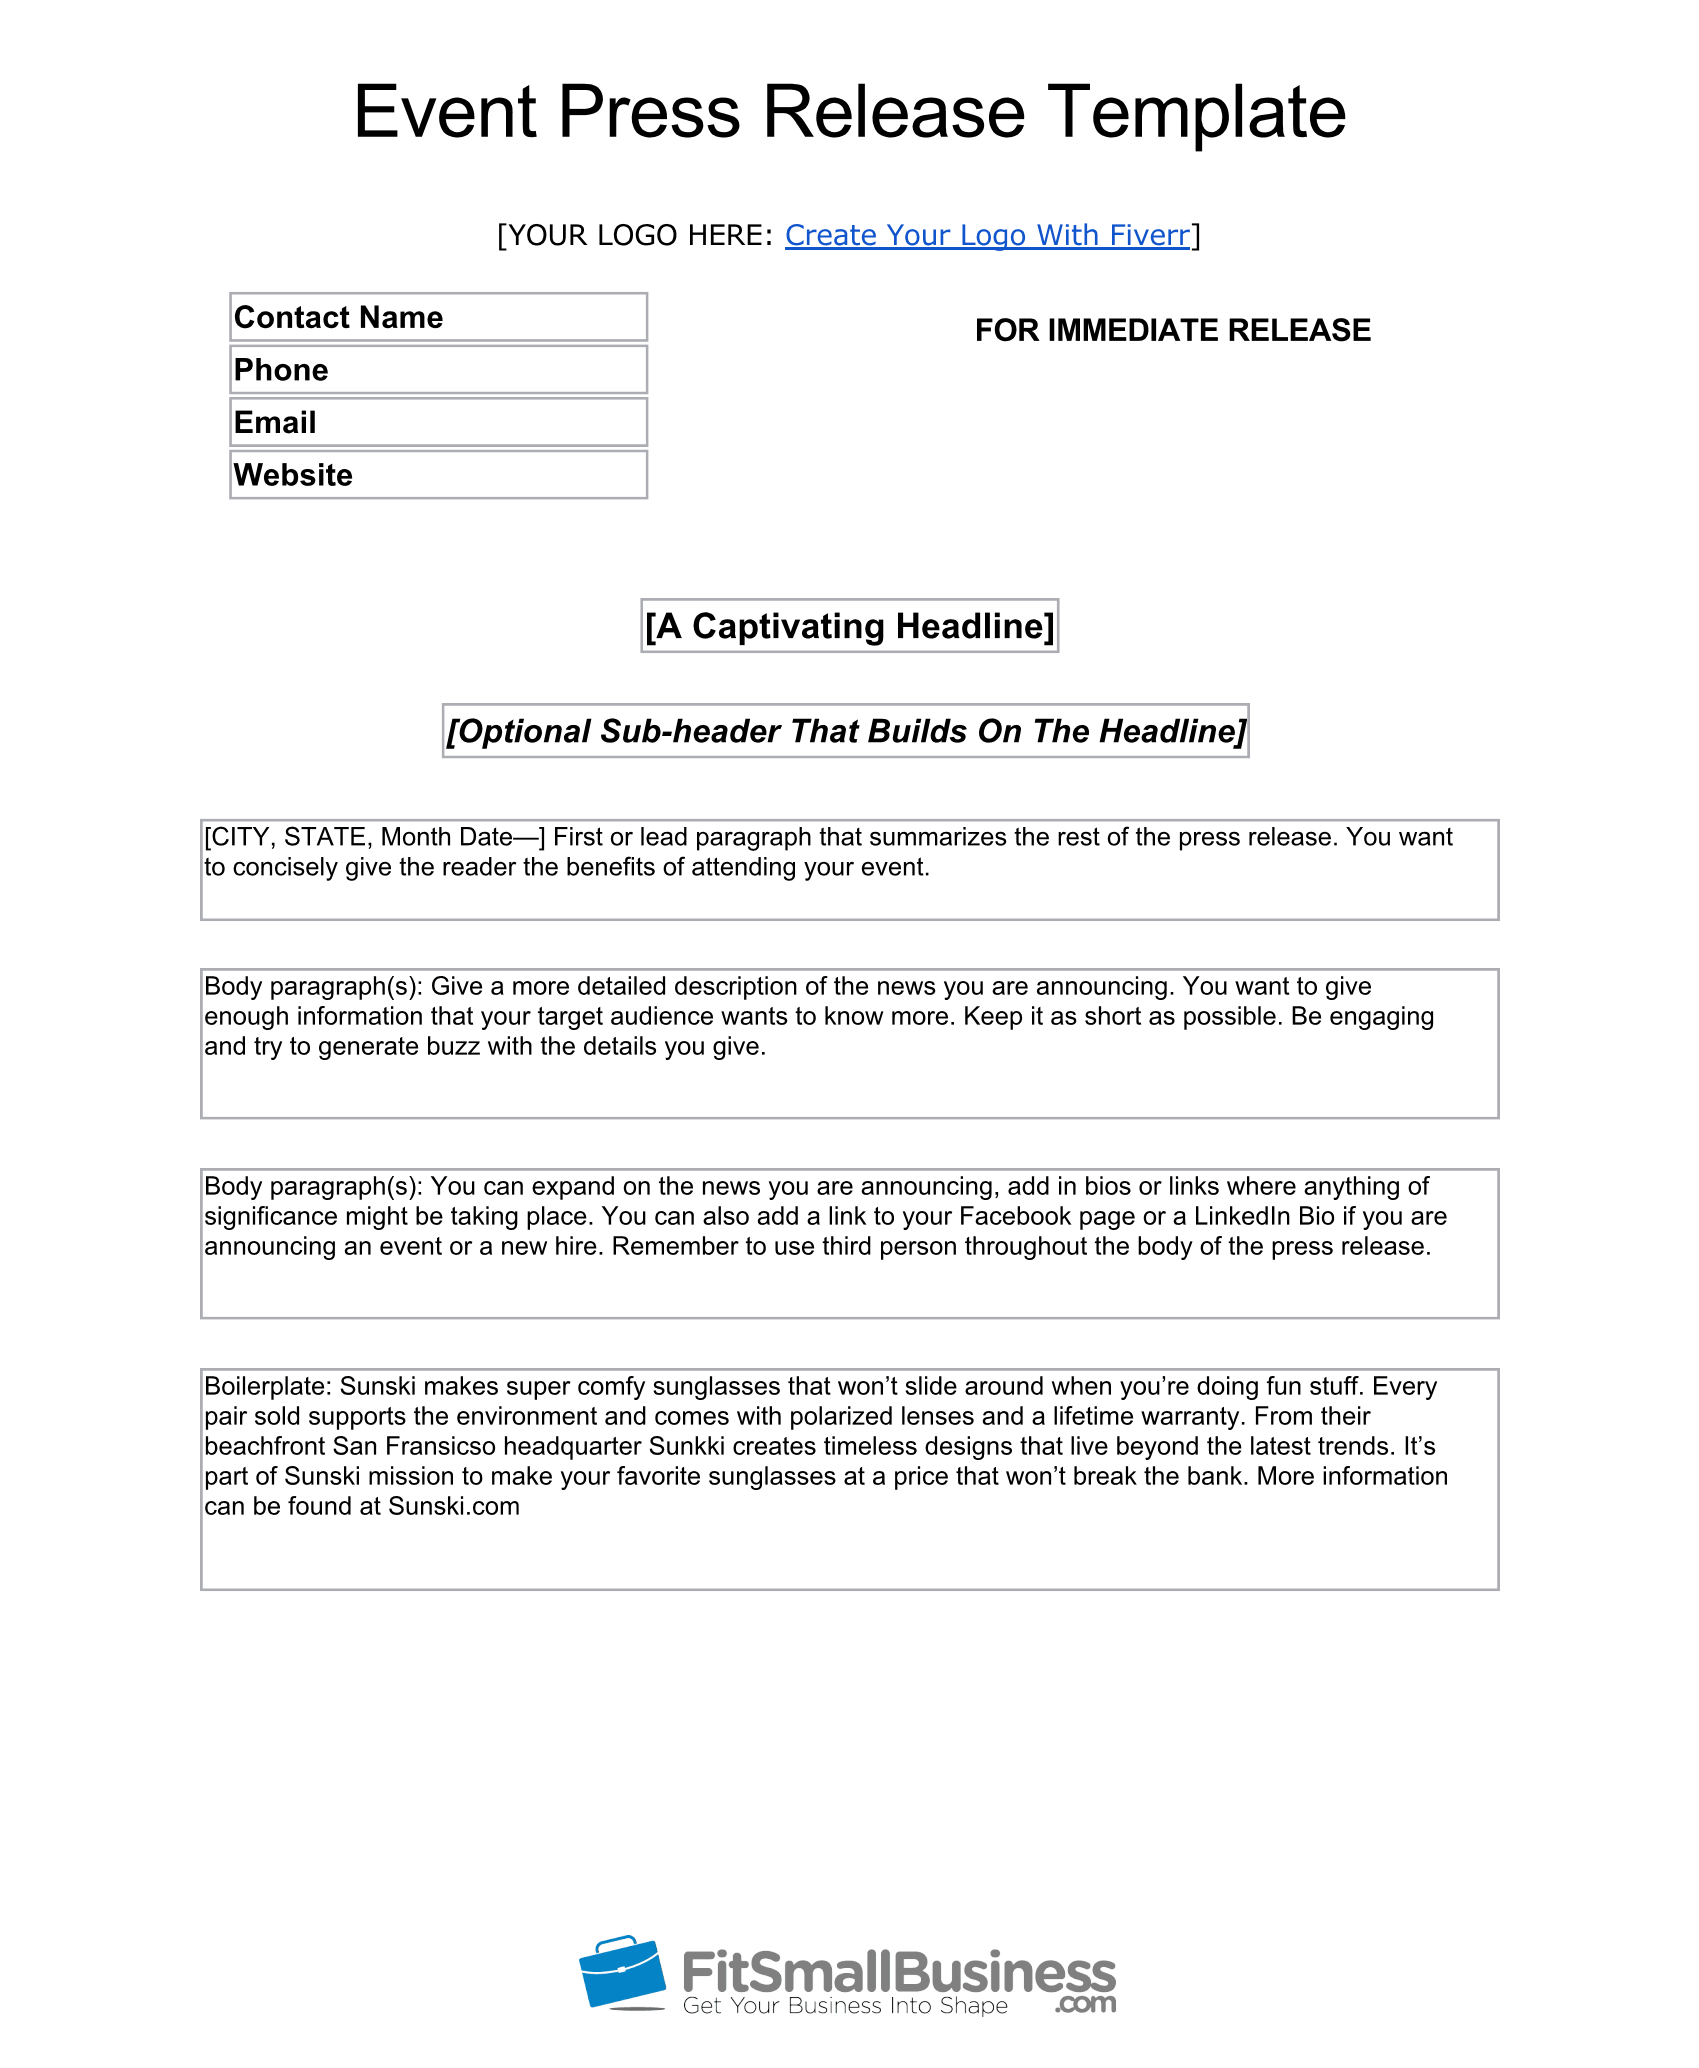 How To Write An Ap Style Press Release +[Template] In Media Advisory Template